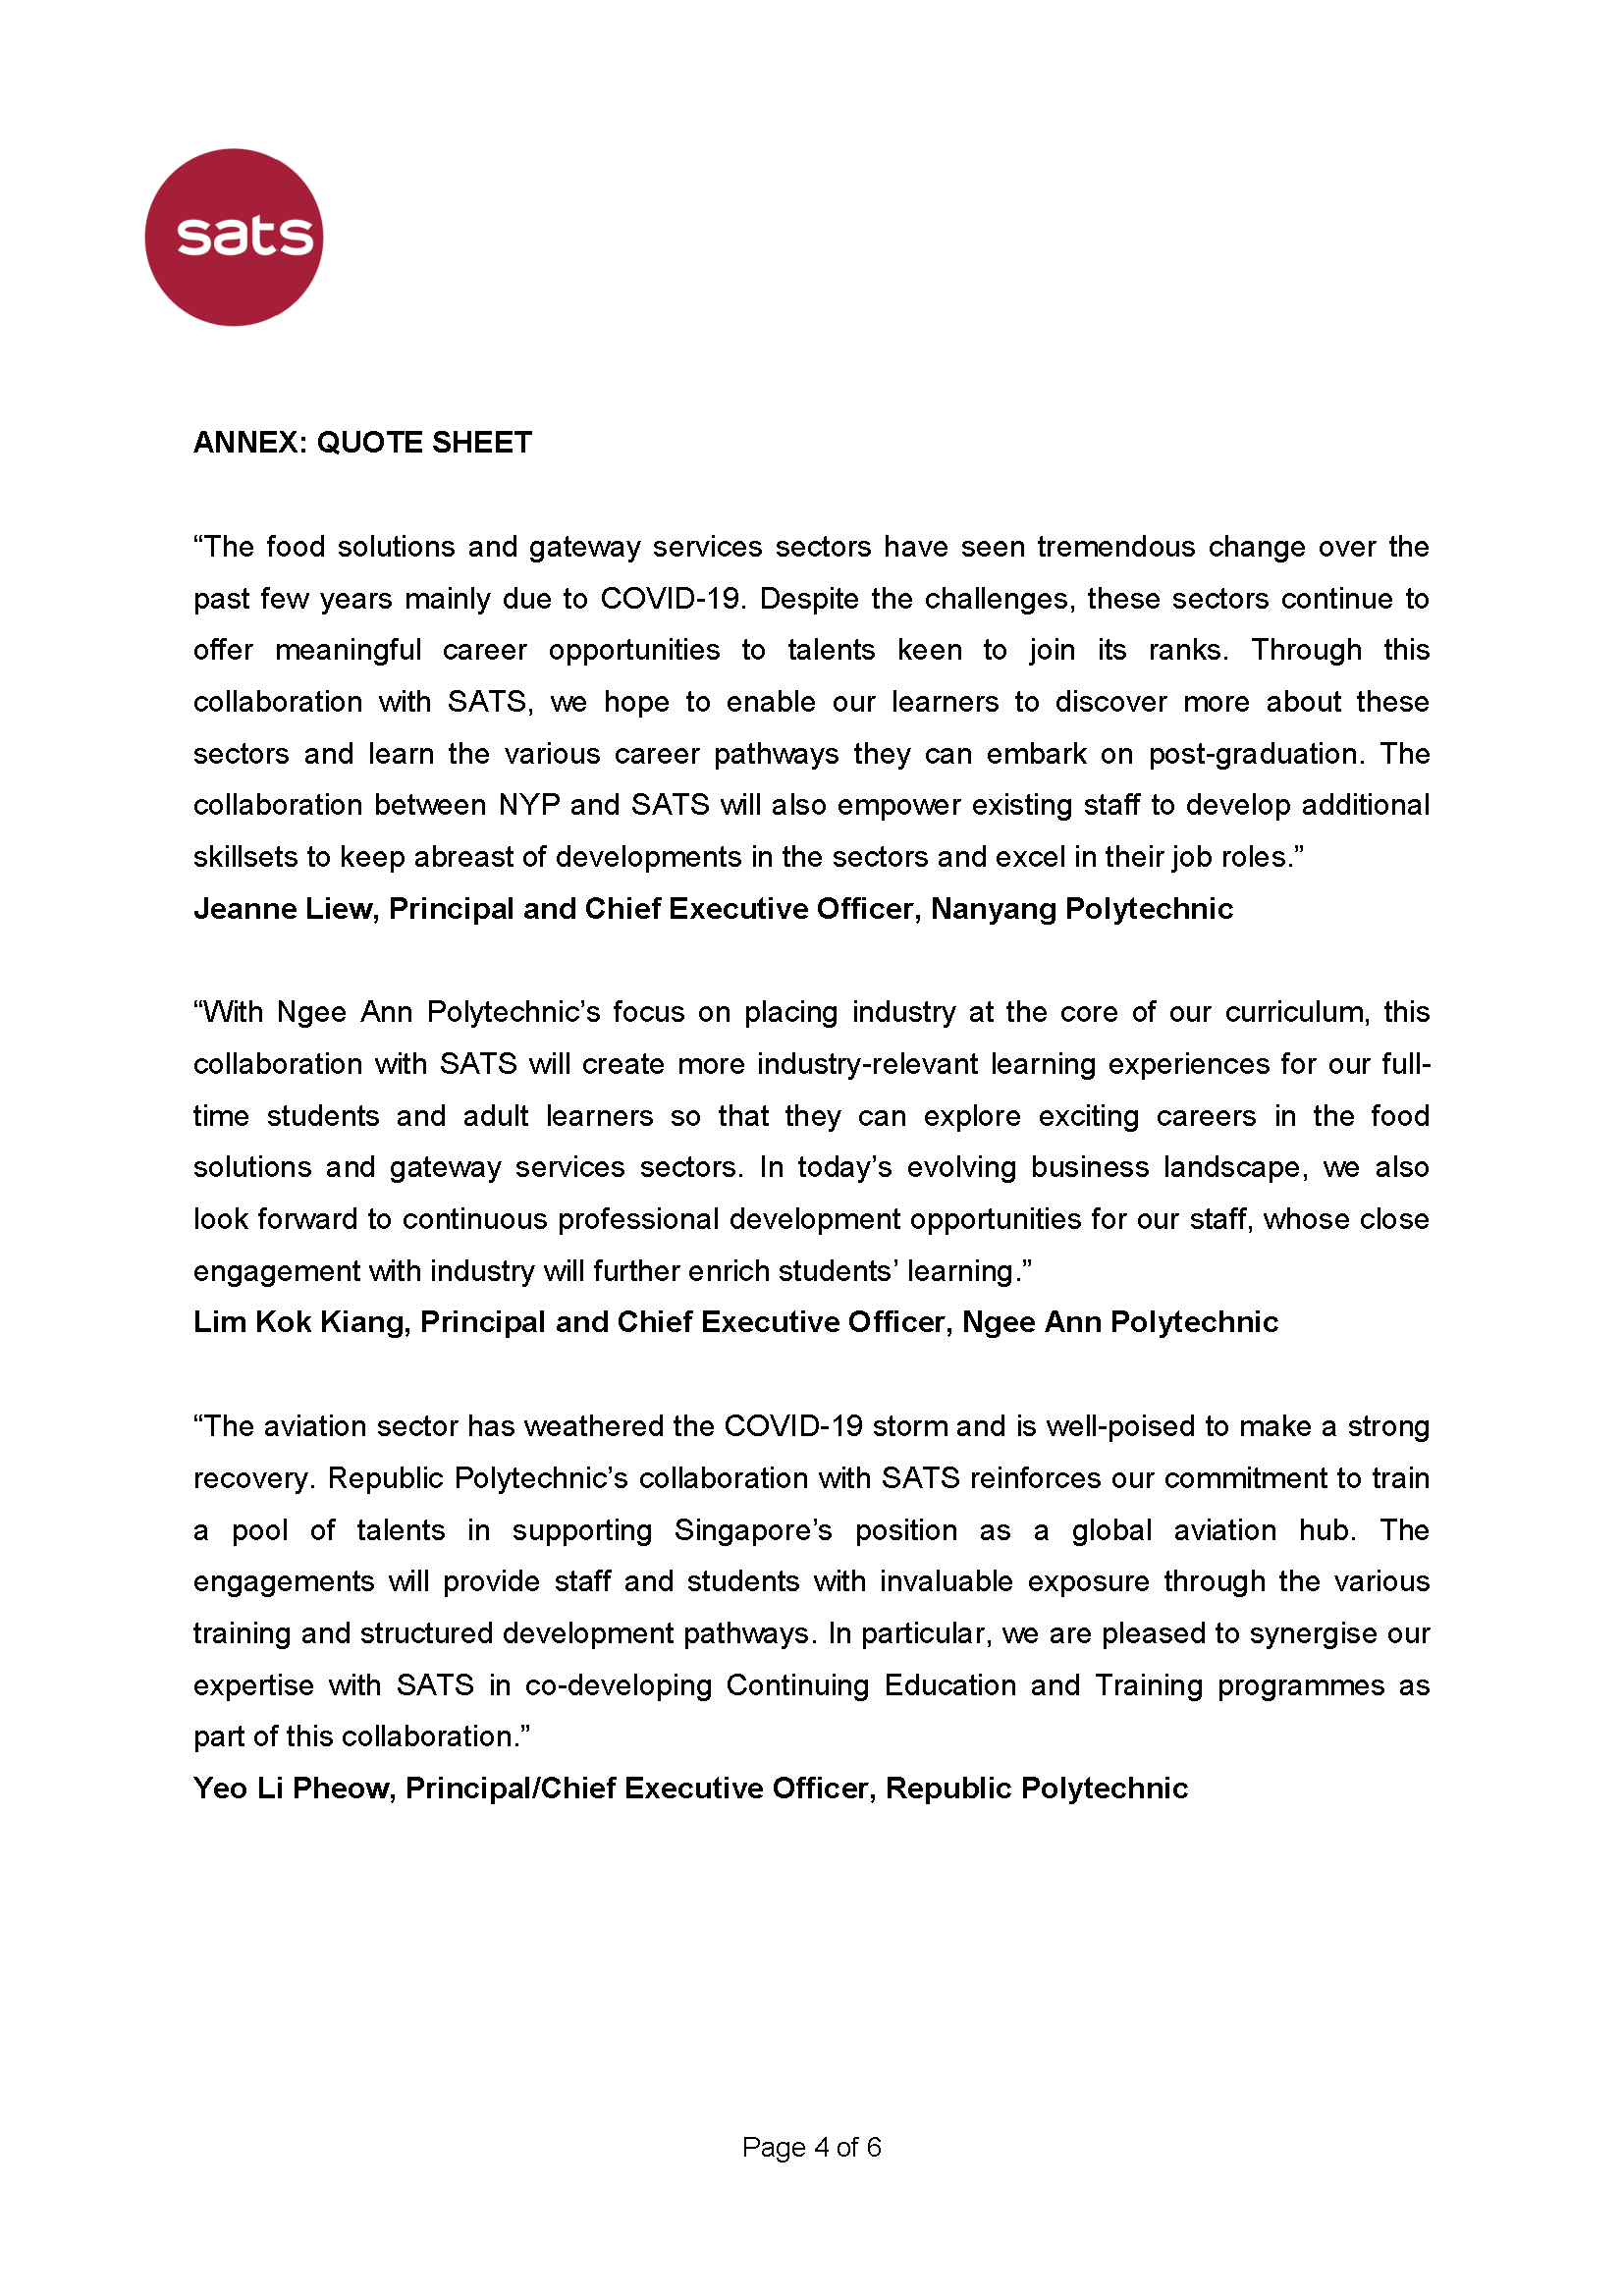 20230206_1200 SATS Media Release on MOU with Polytechnics_forPolytechnics_Page_4